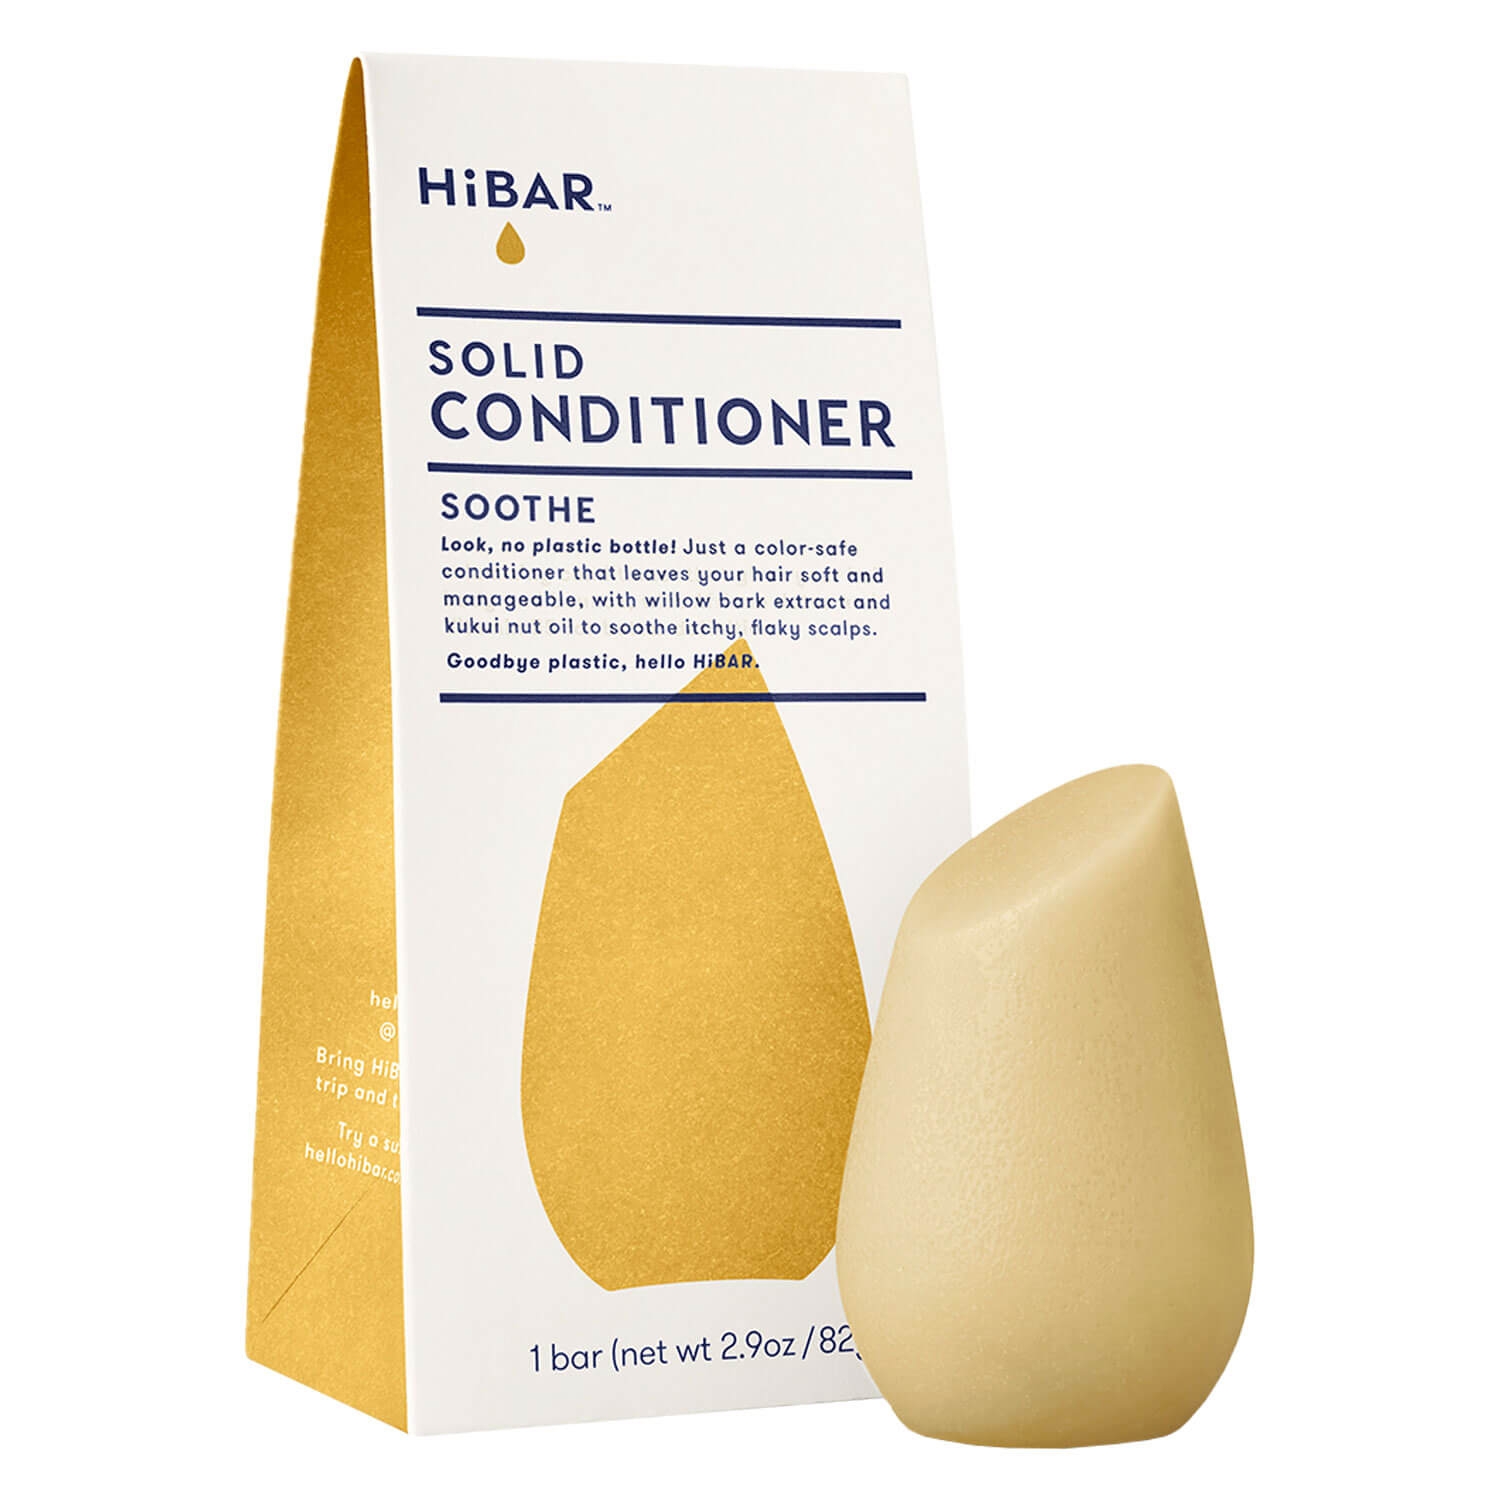 Product image from HiBAR - SOOTHE Fester Conditioner